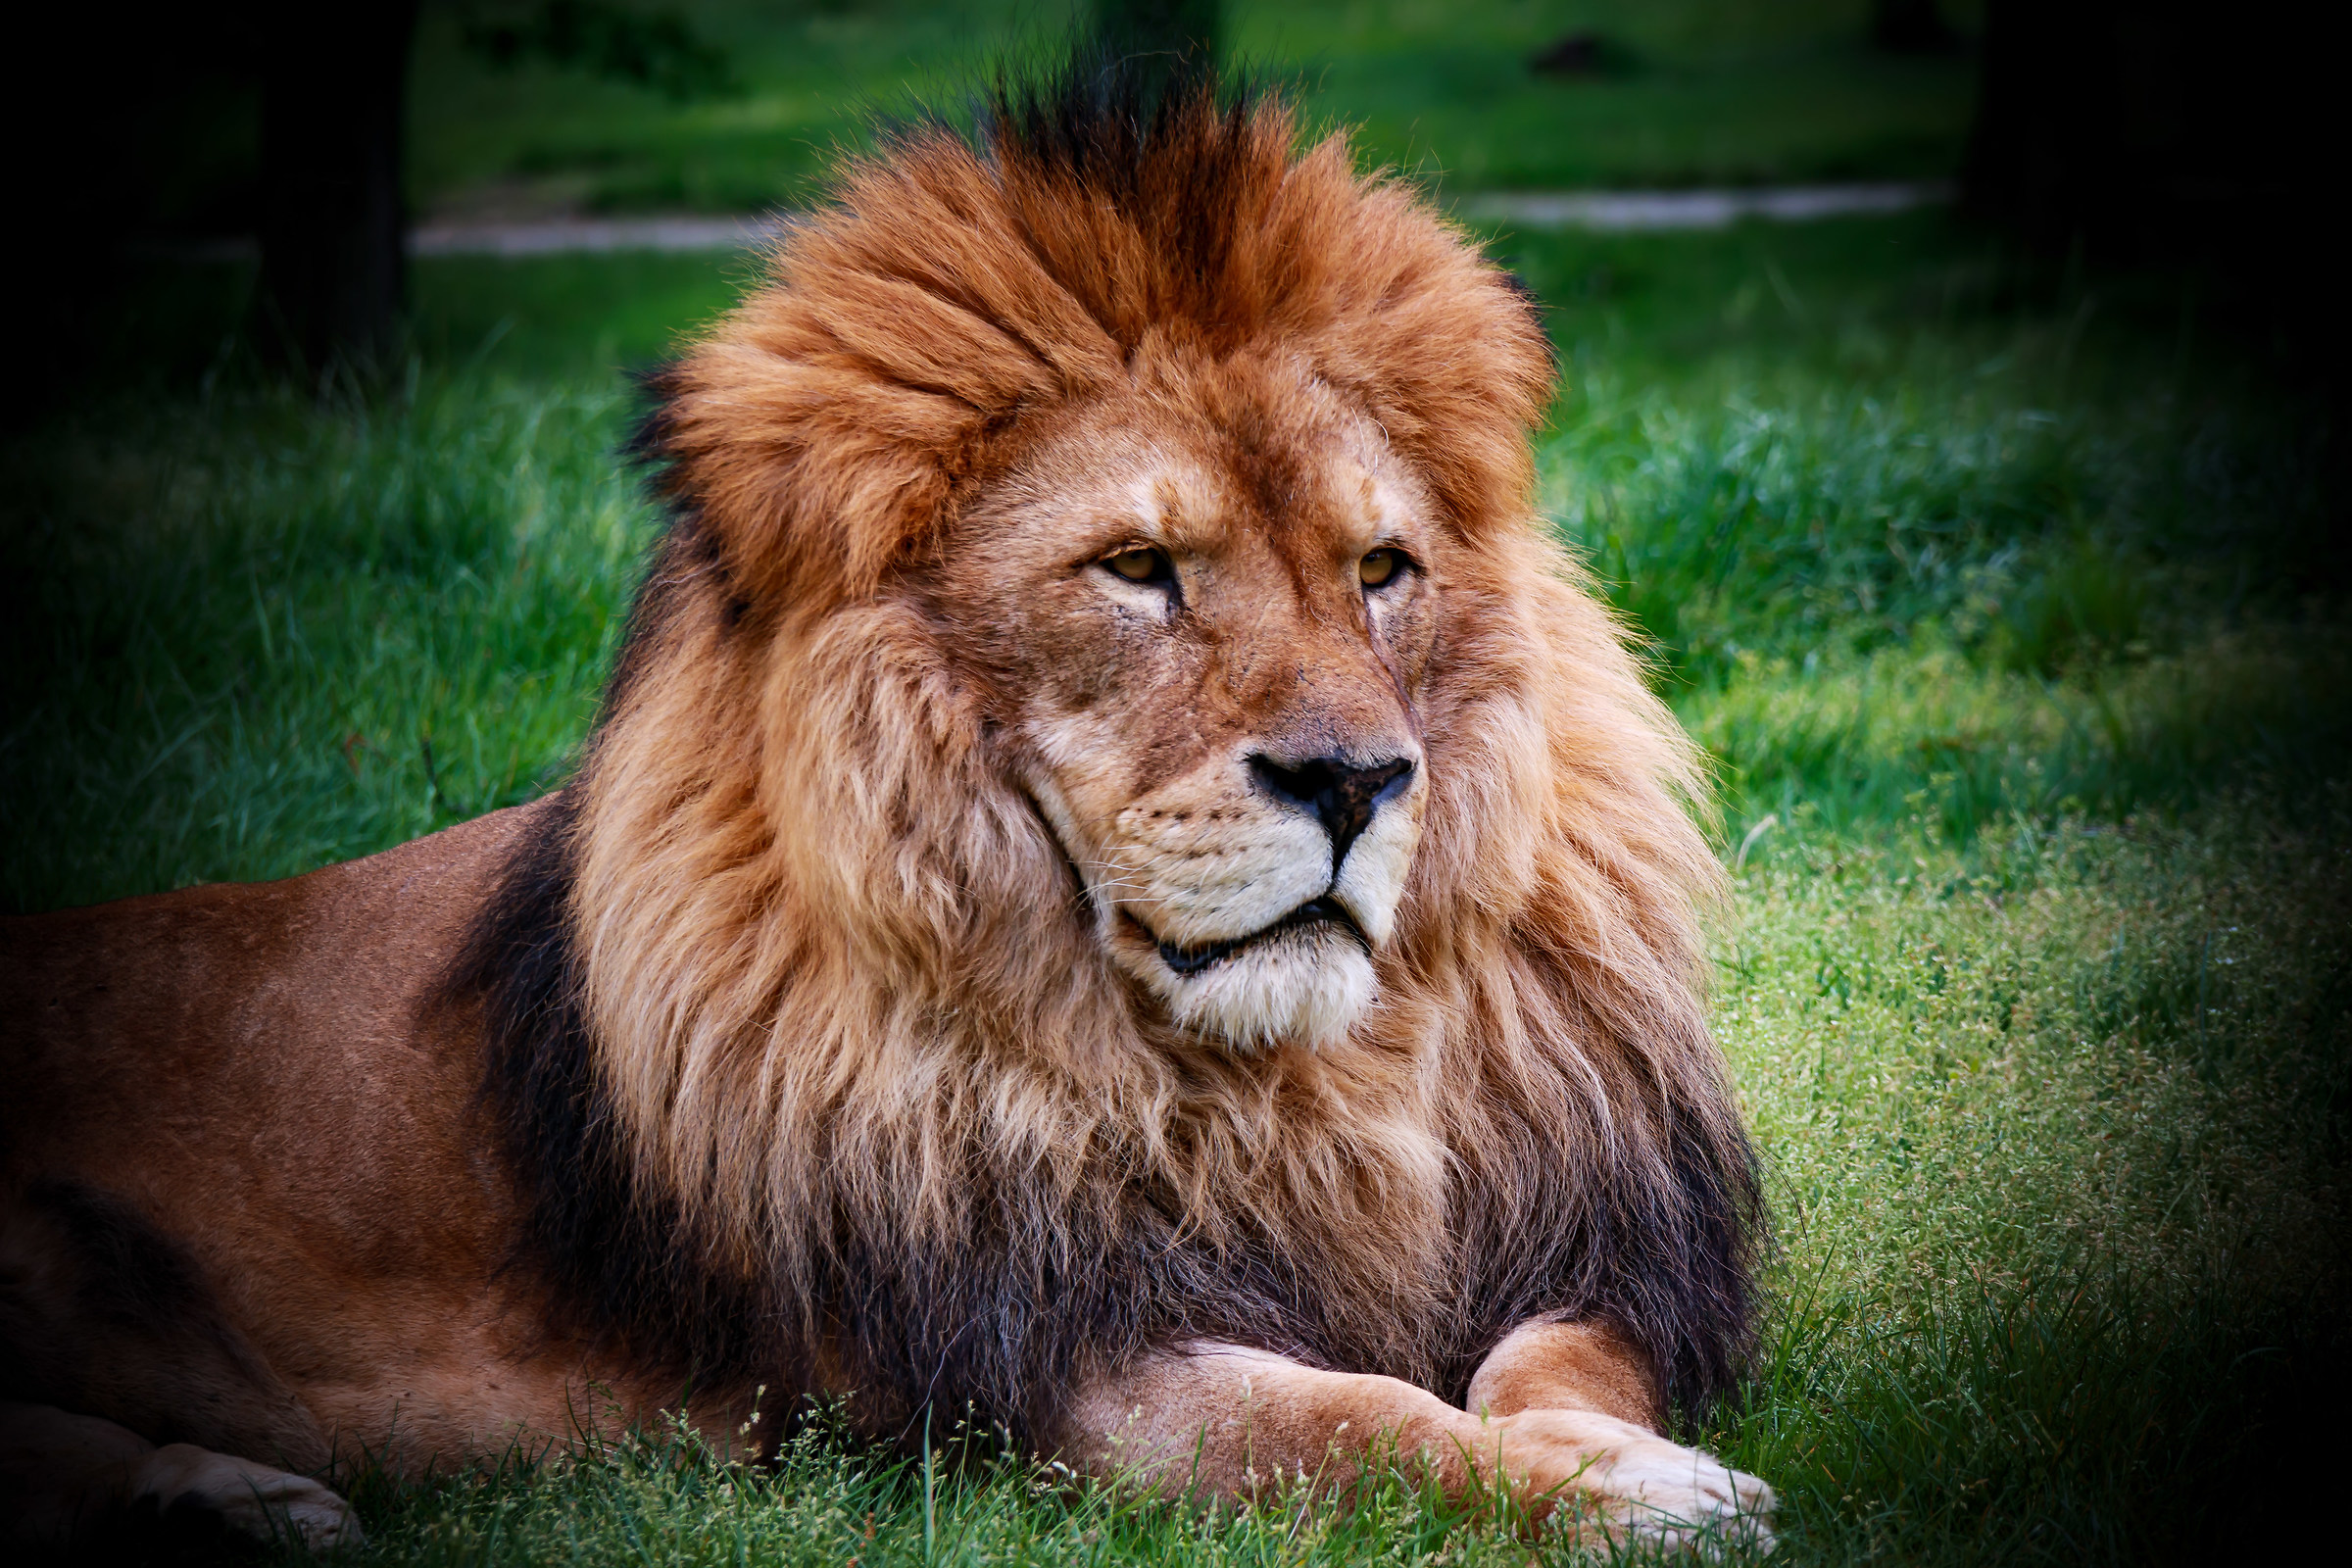 His Majesty "The Lion"...